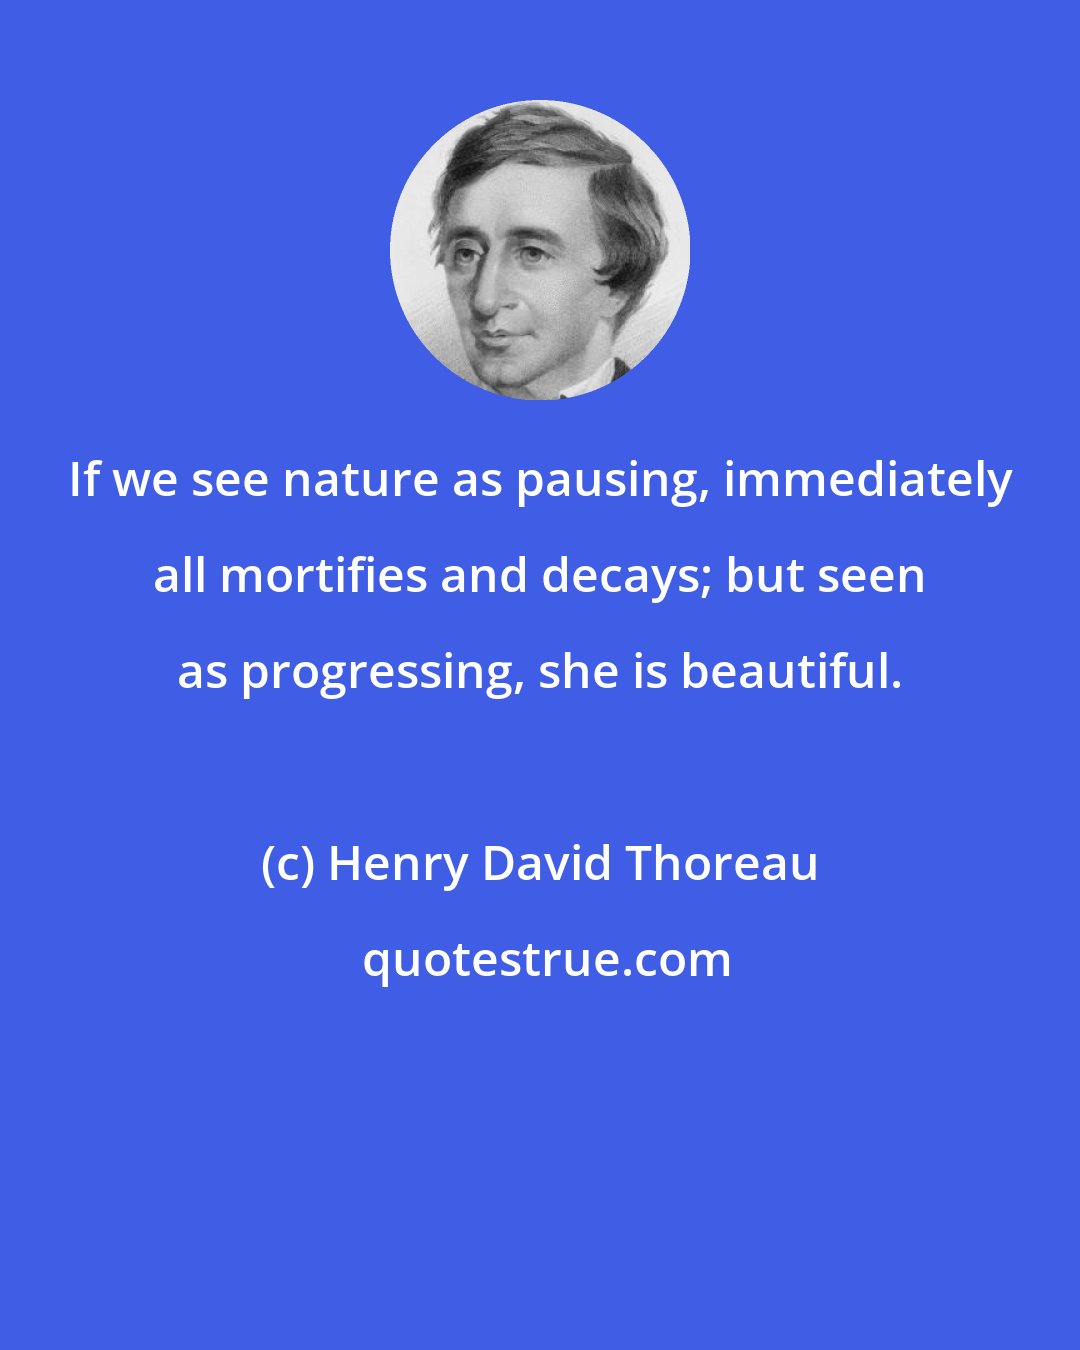 Henry David Thoreau: If we see nature as pausing, immediately all mortifies and decays; but seen as progressing, she is beautiful.